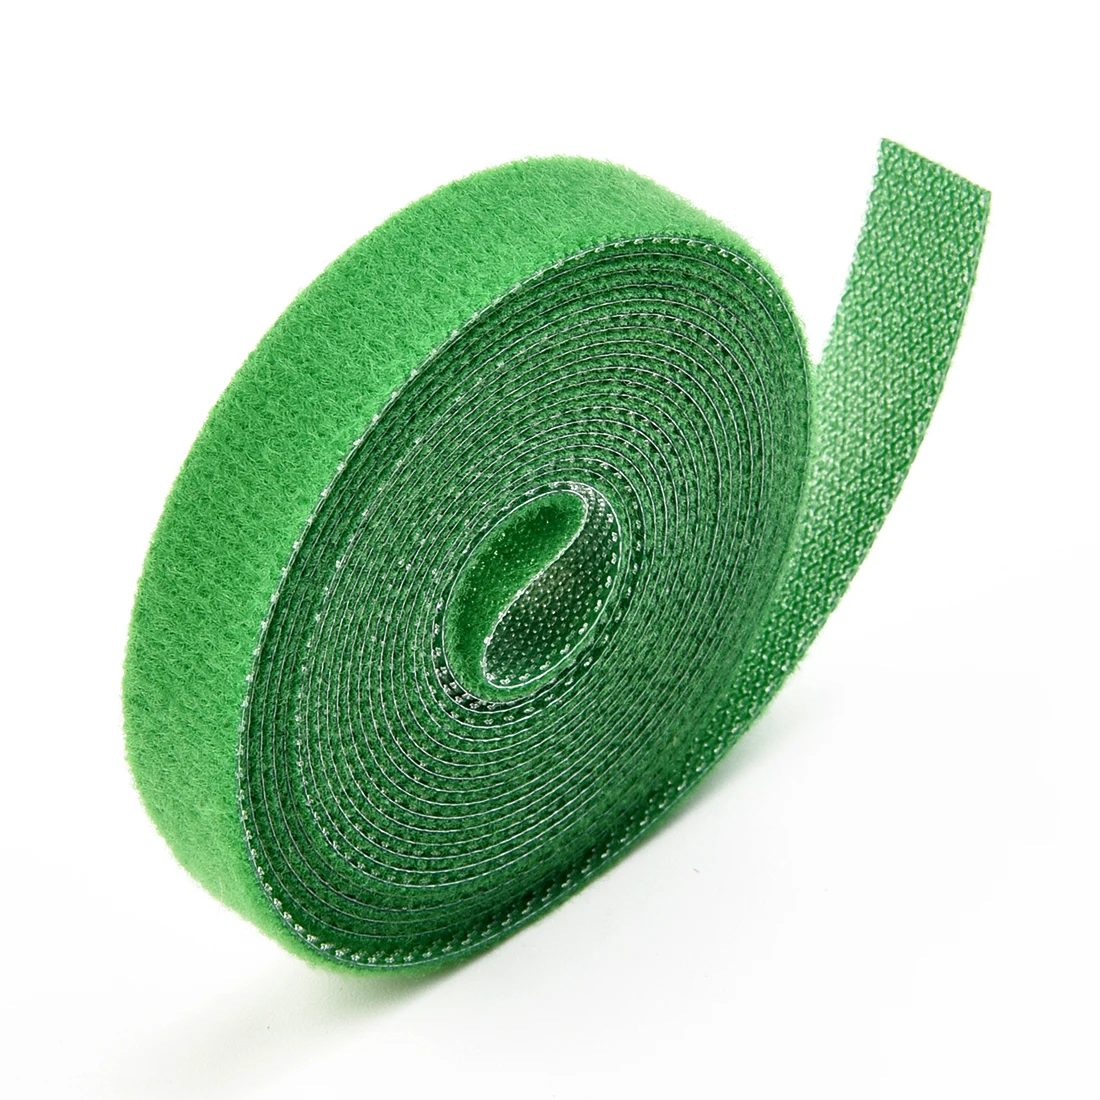 

3 Rolls Twine Tie Green Tape Nylon Plant Ties Hook And Loop Garden Supports Bamboo Cane Wrap Support Garden Accessor